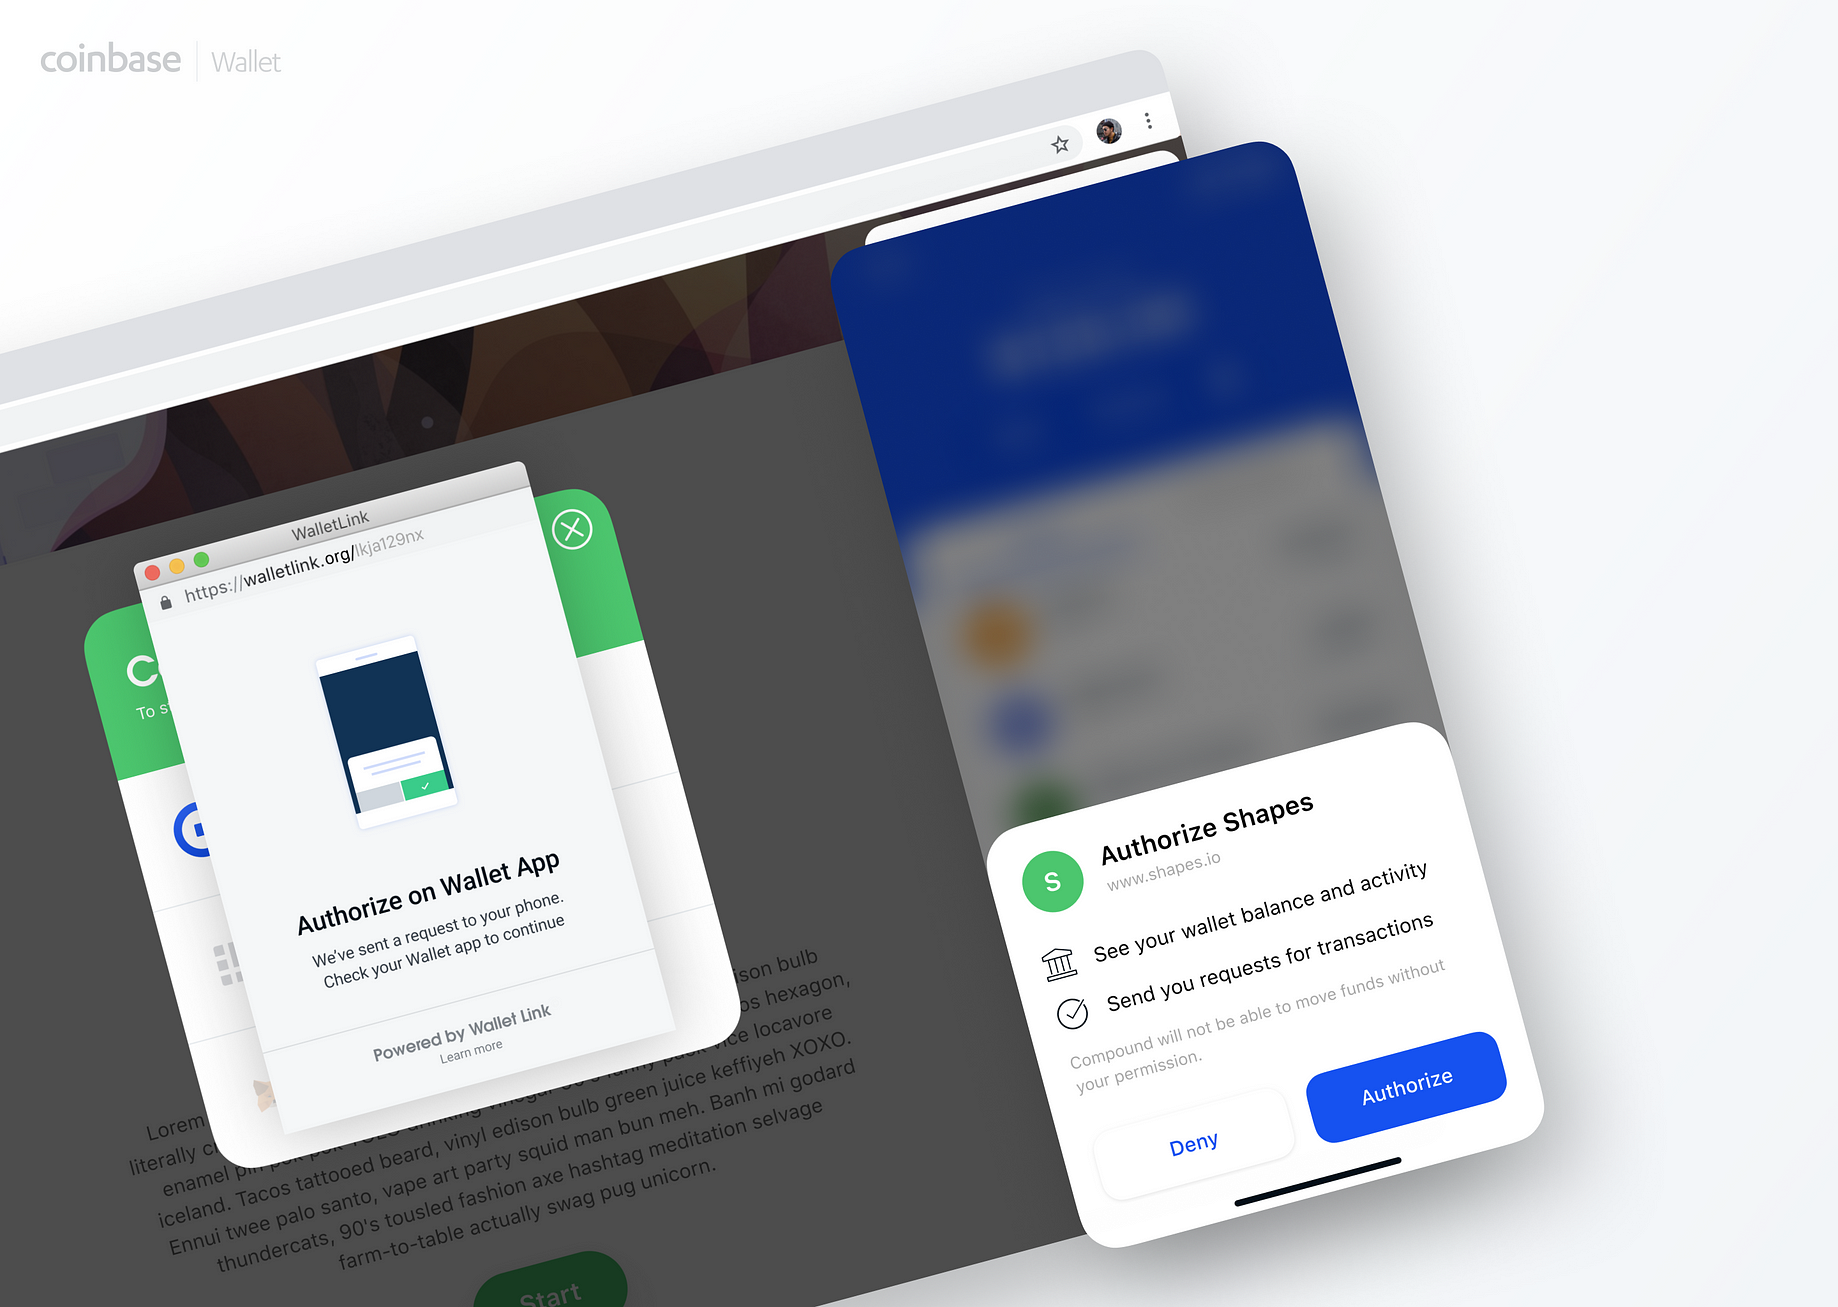 How to get coinbase wallet on pc